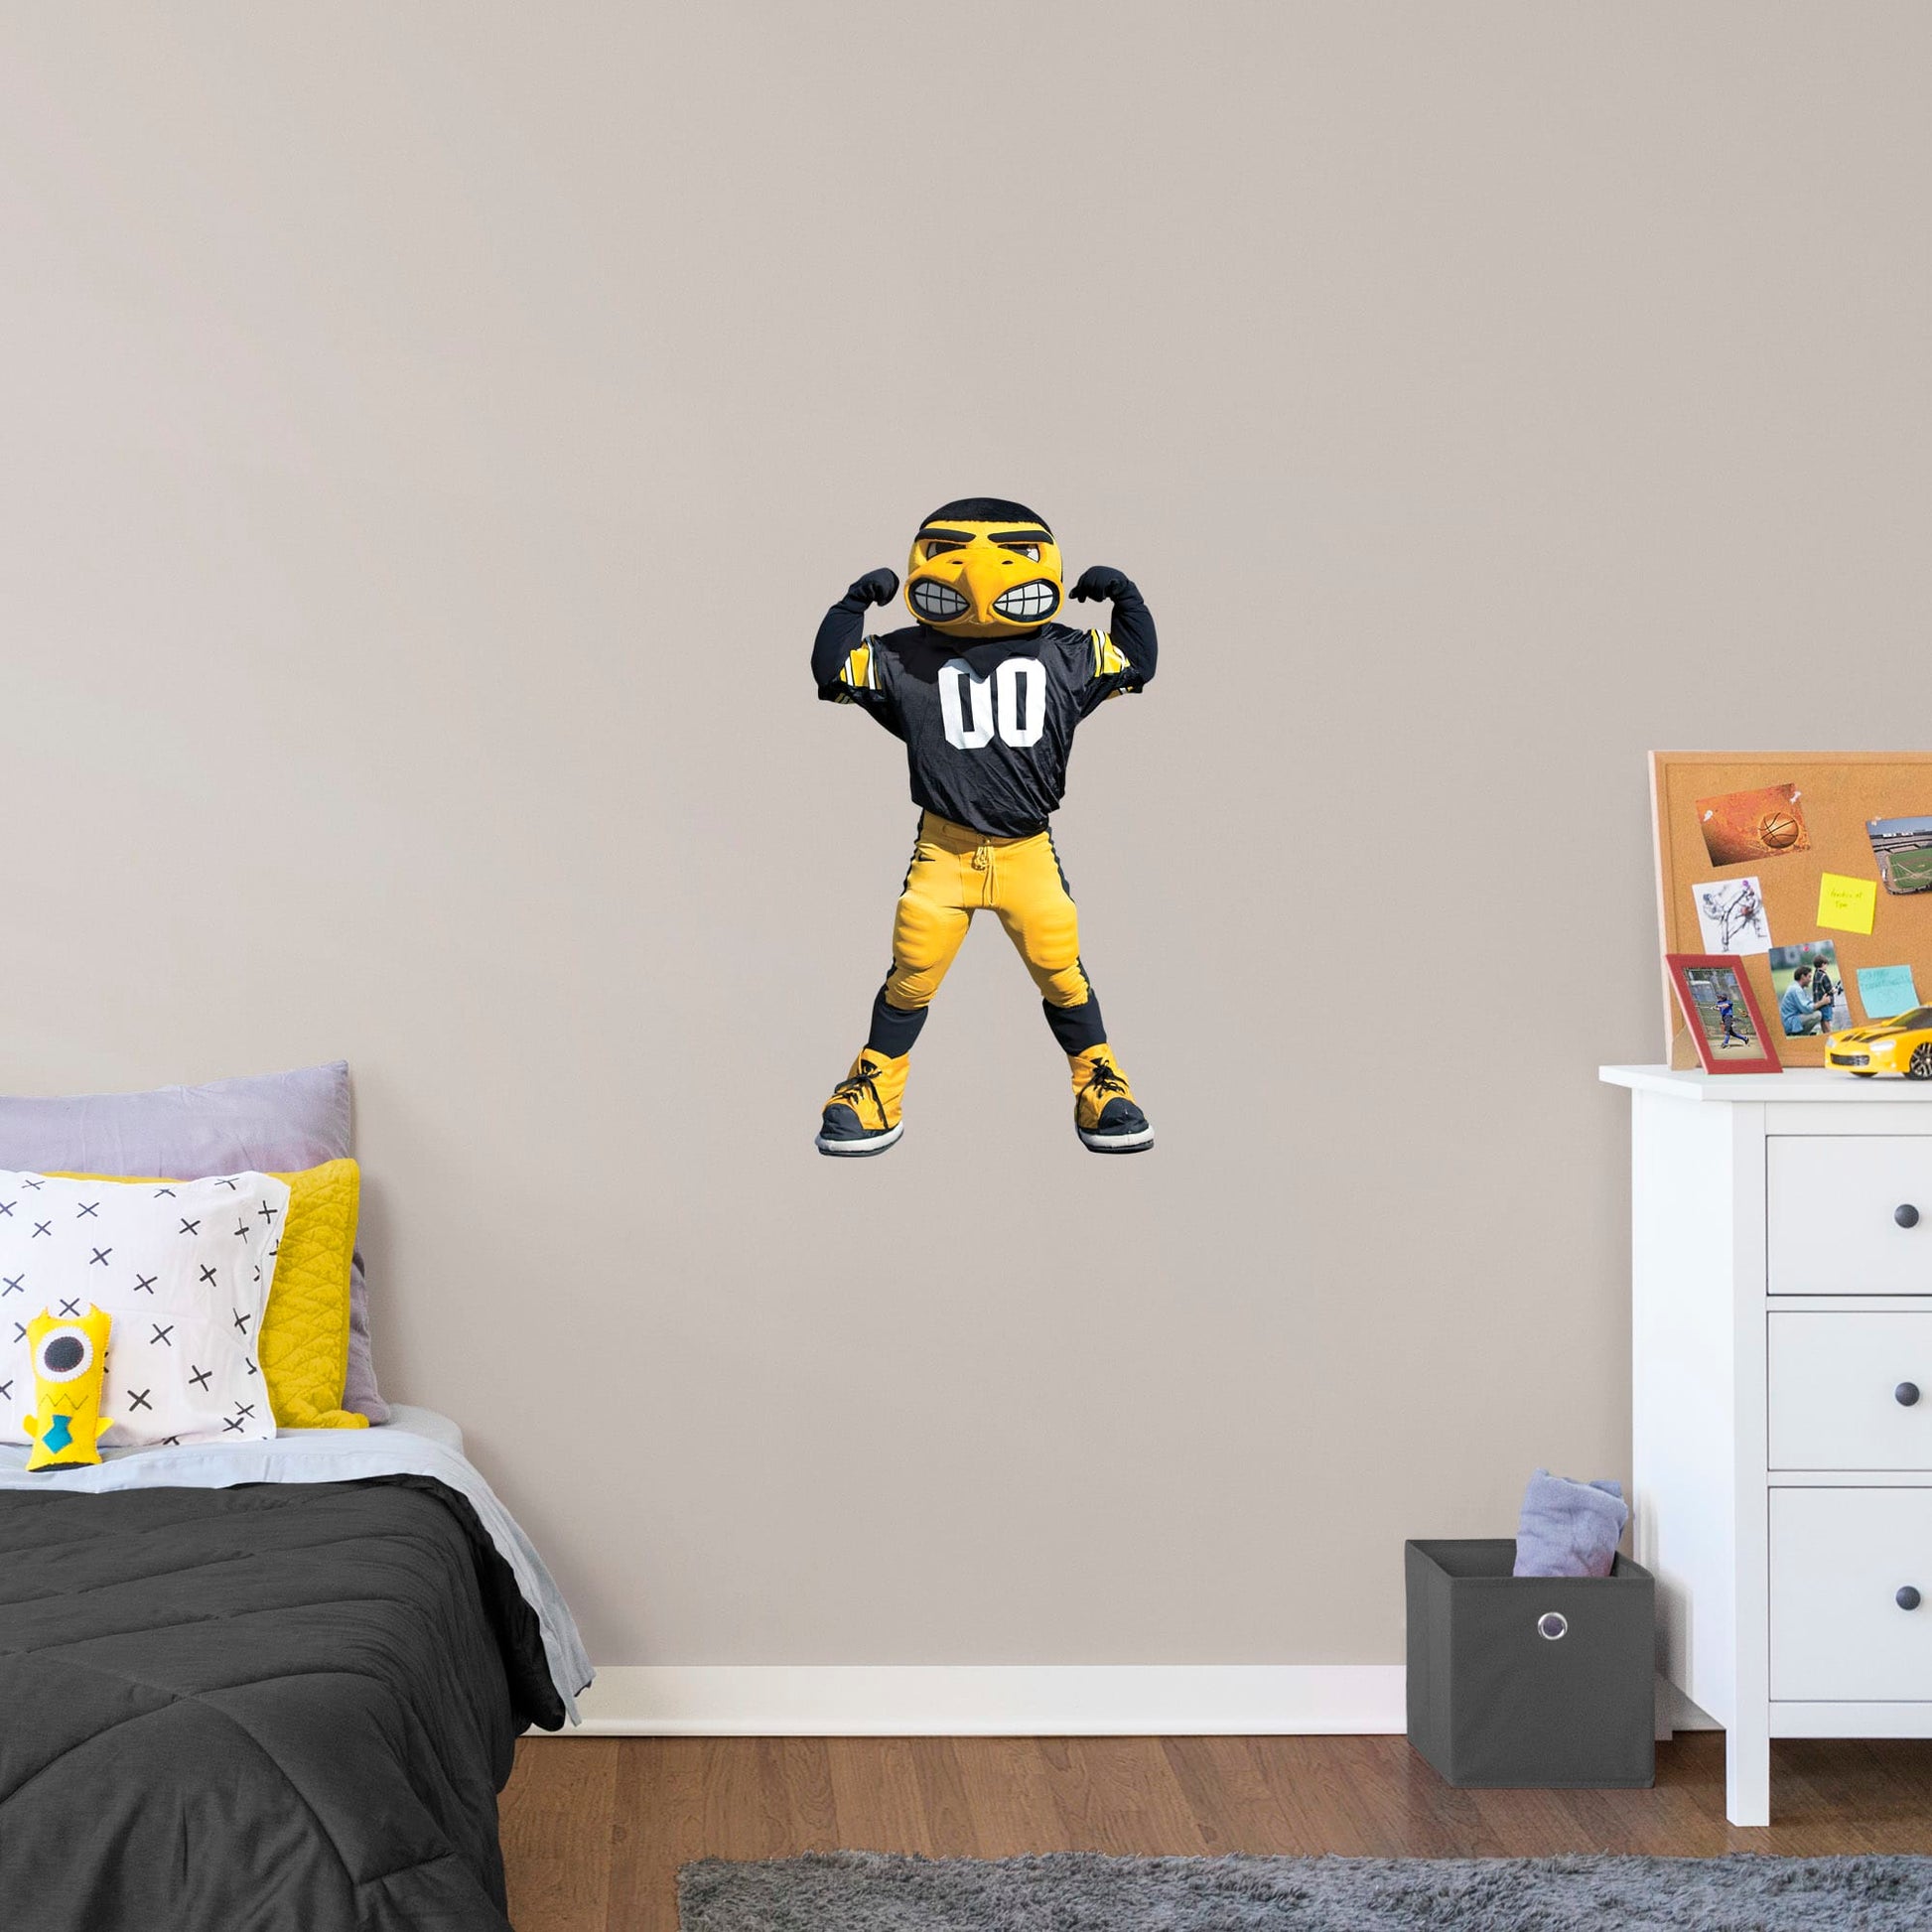 Giant Character + 1 Decal (26"W x 51"H)